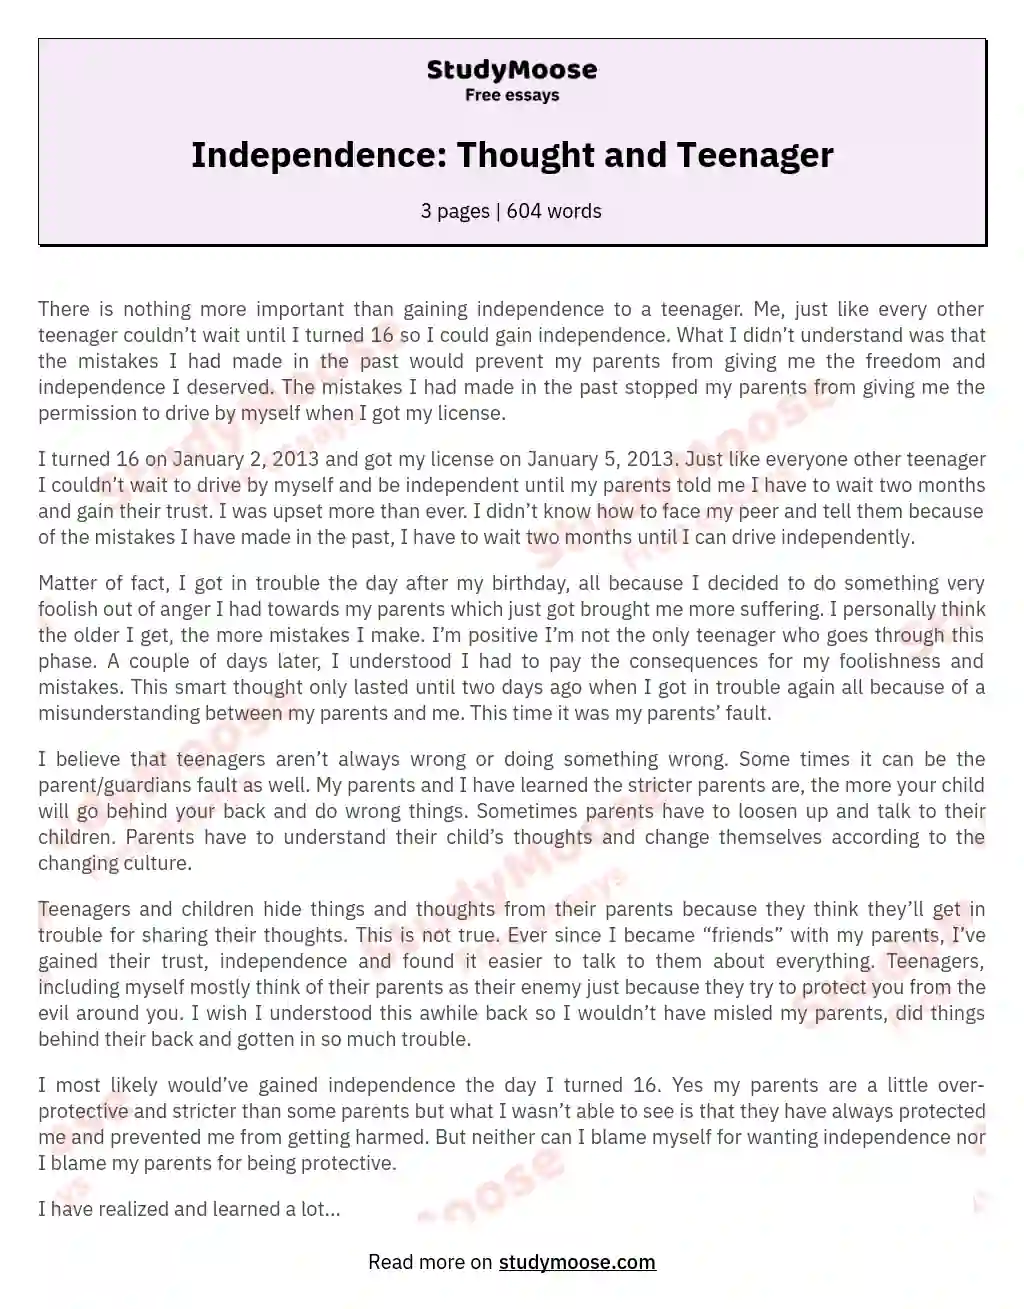 Independence: Thought and Teenager essay